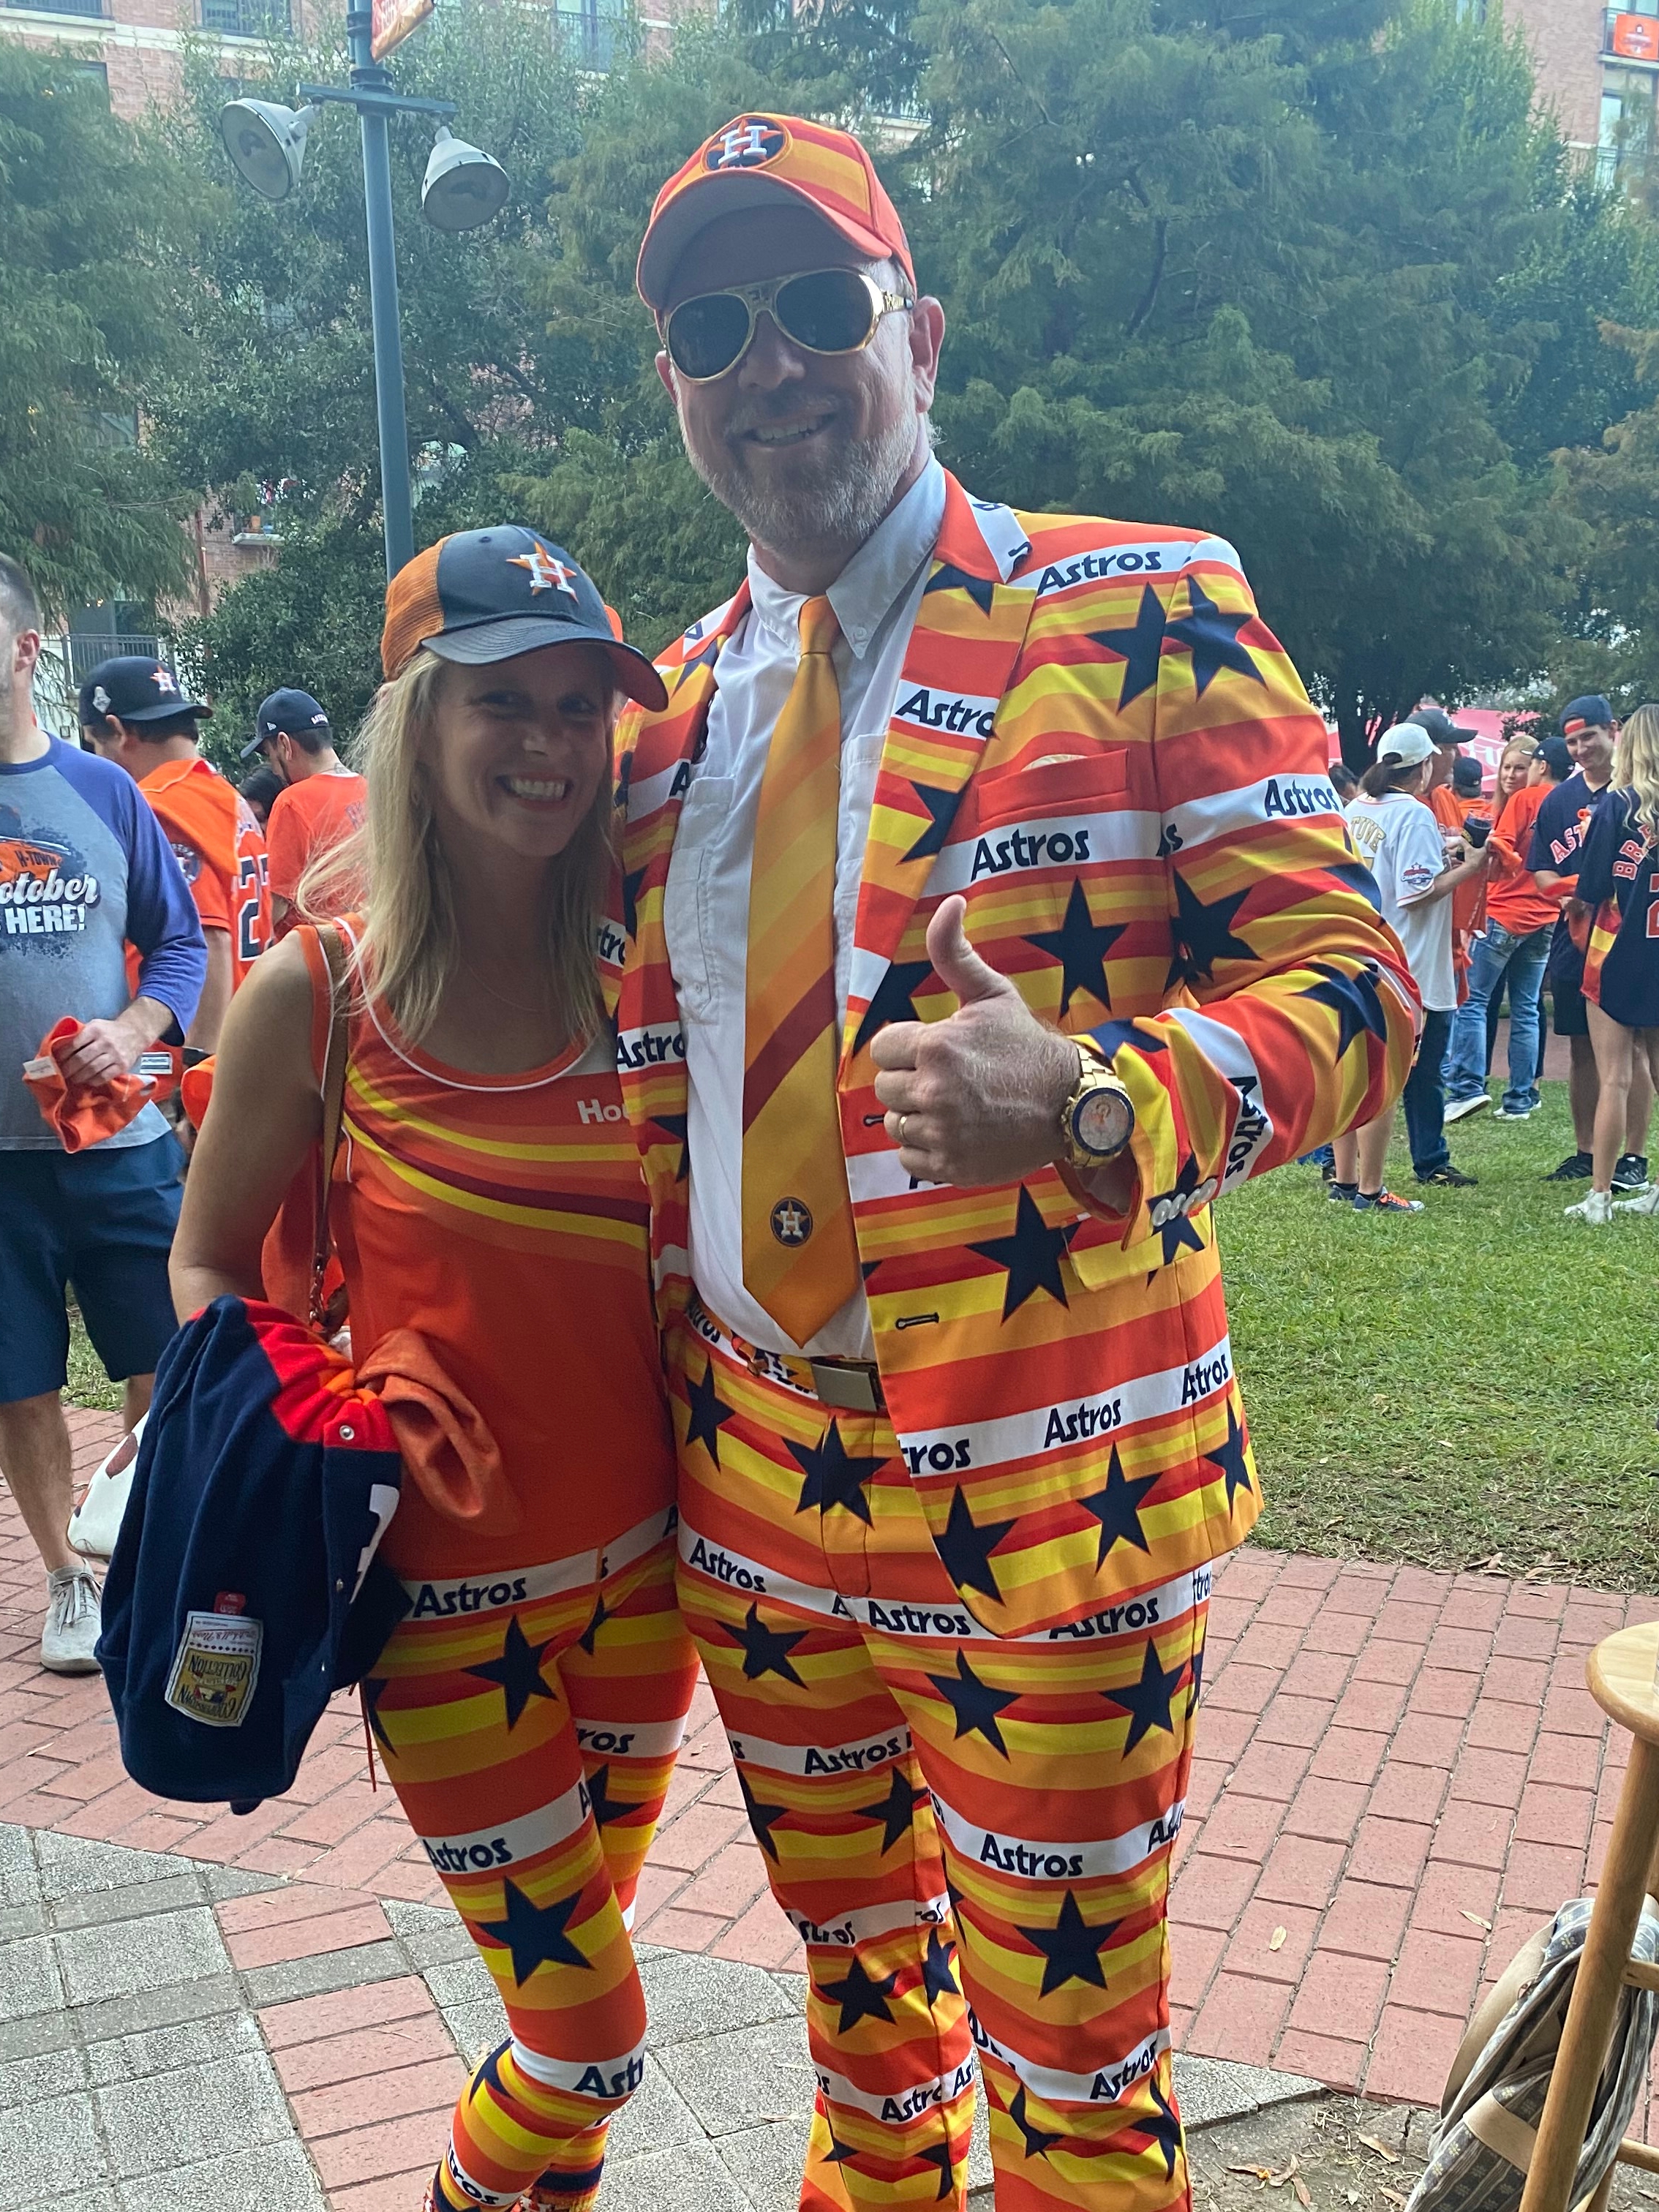 🔒 Looking sharp! Here are some of the best dressed Astros fans at